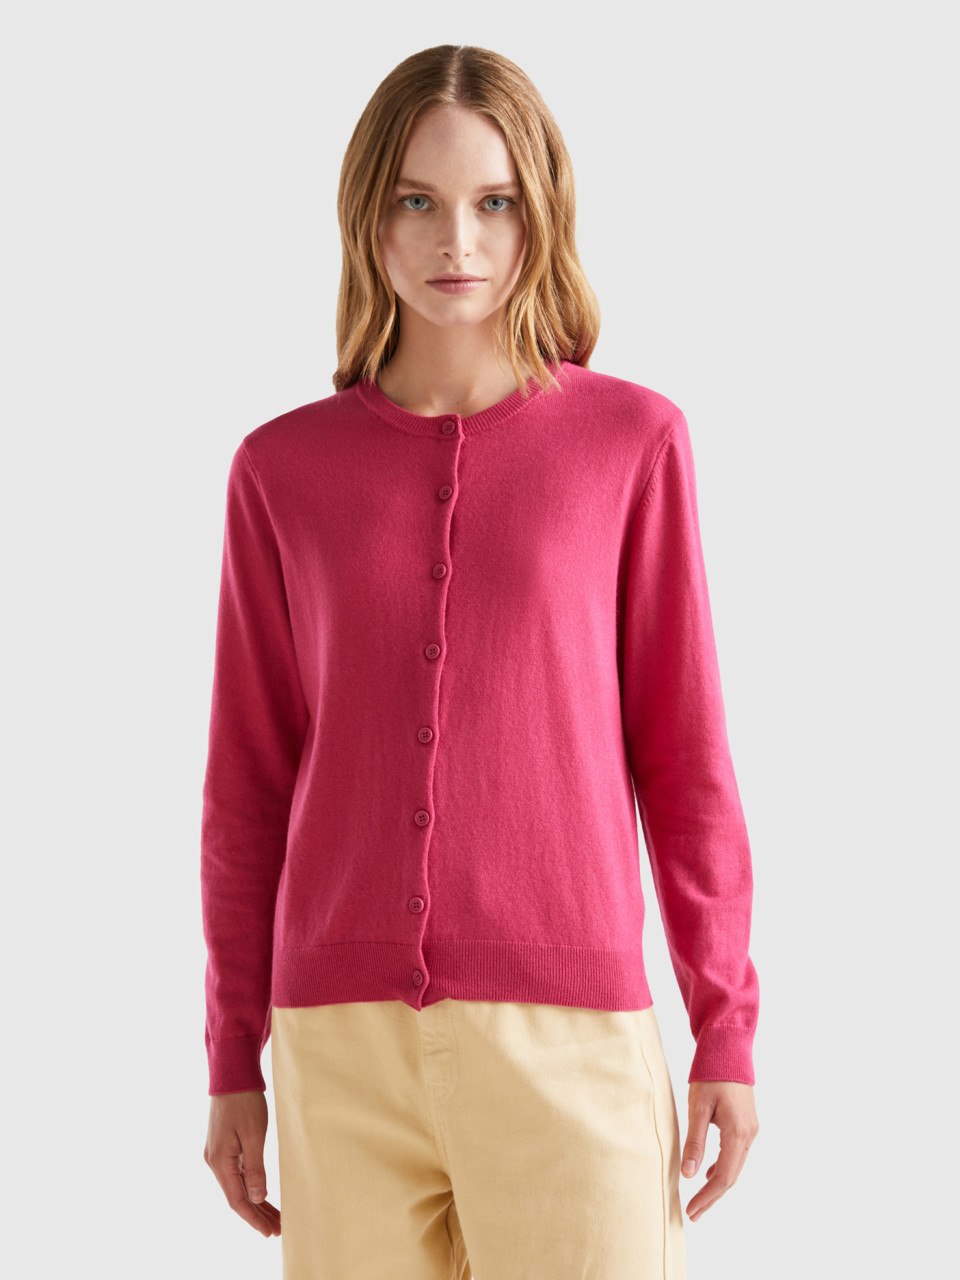 Benetton, Magenta Red Cardigan In Cashmere And Wool Blend, Cyclamen, Women